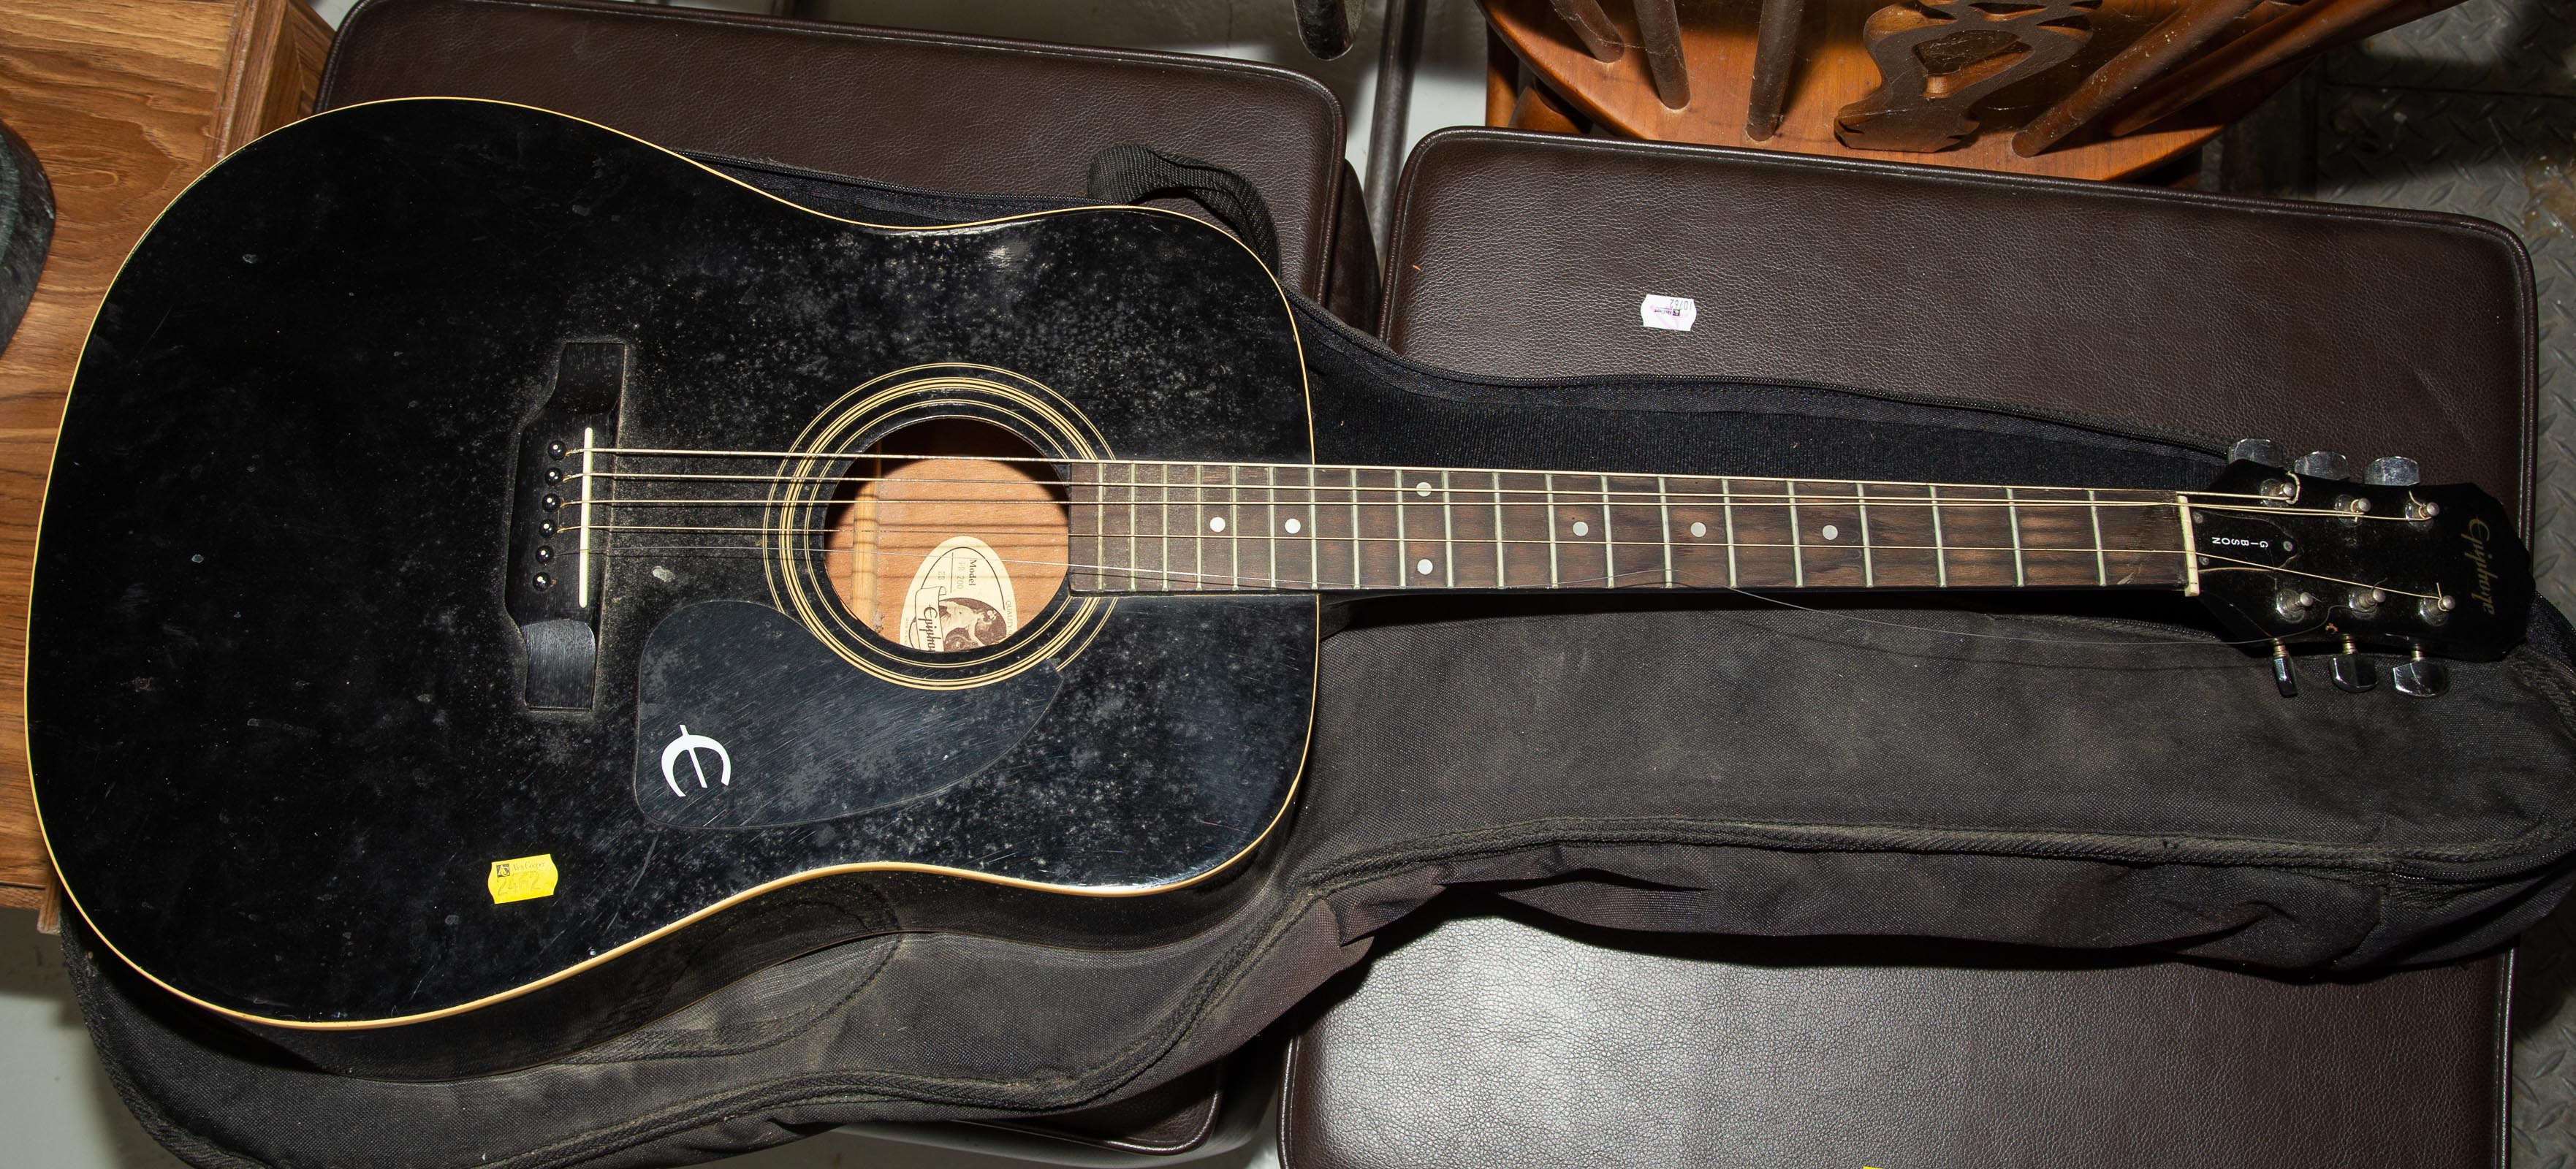 GIBSON EPIPHONE ACOUSTIC GUITAR 337c7f